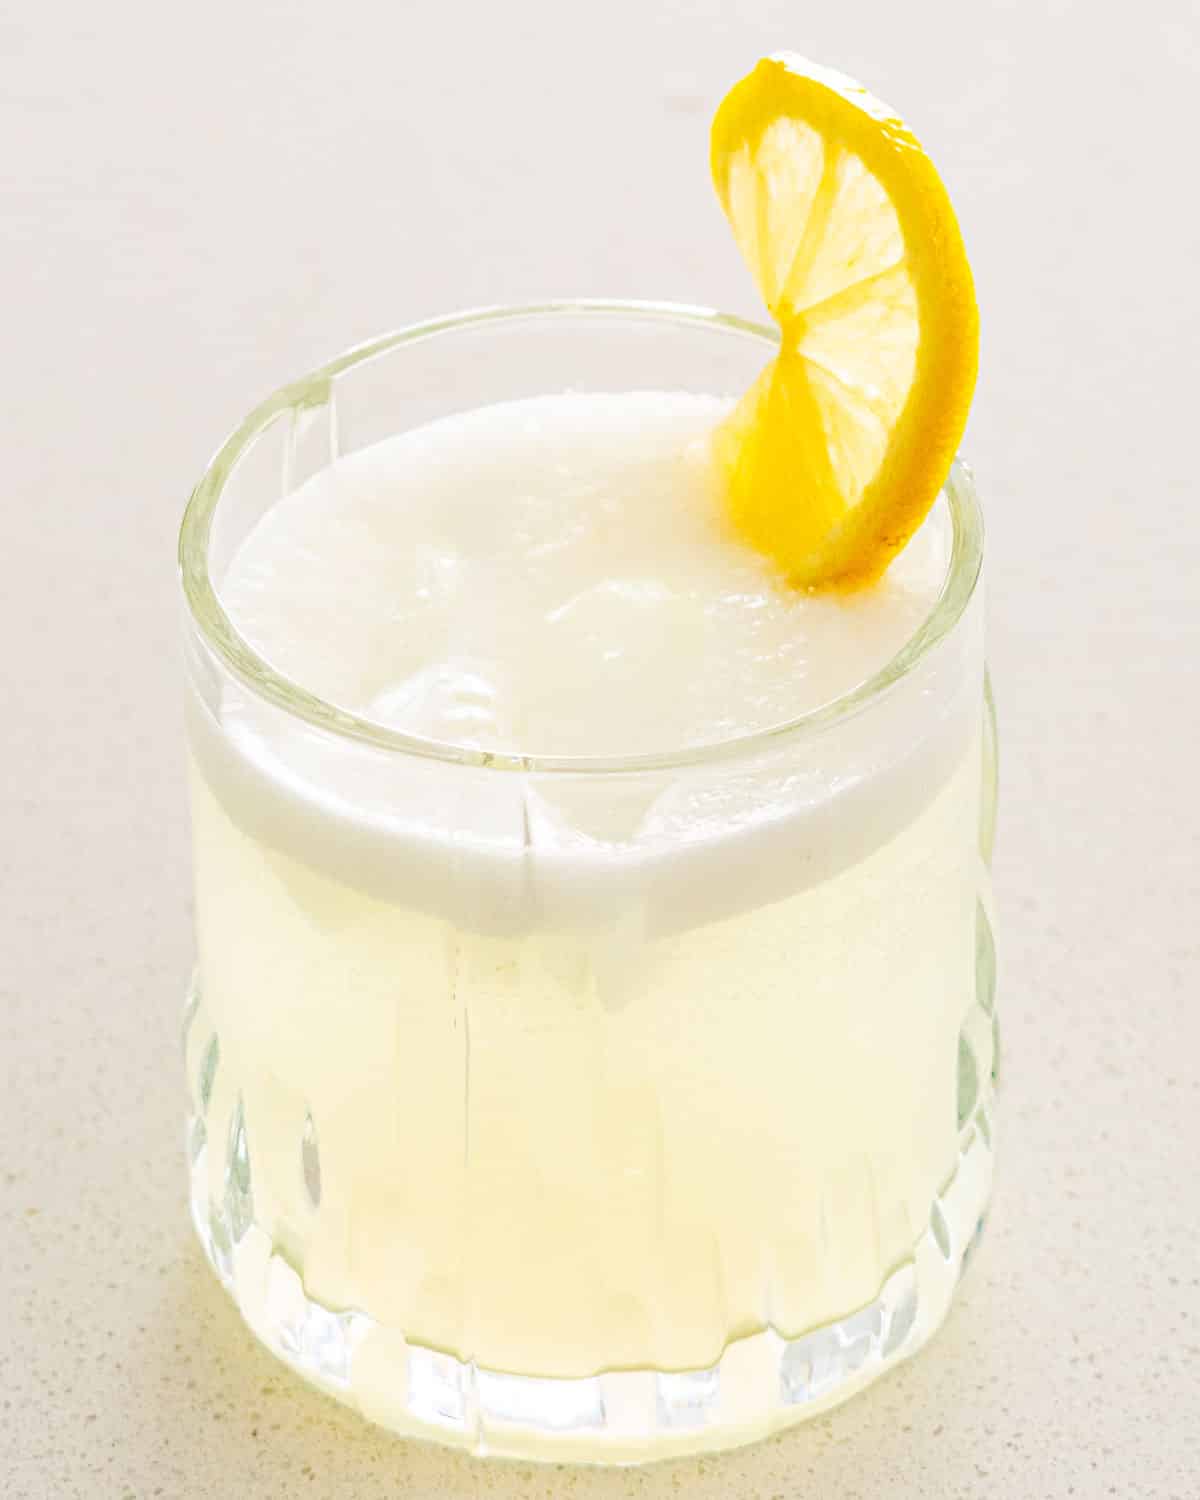 a glass filled with gin fizz and garnished with a lemon slice.